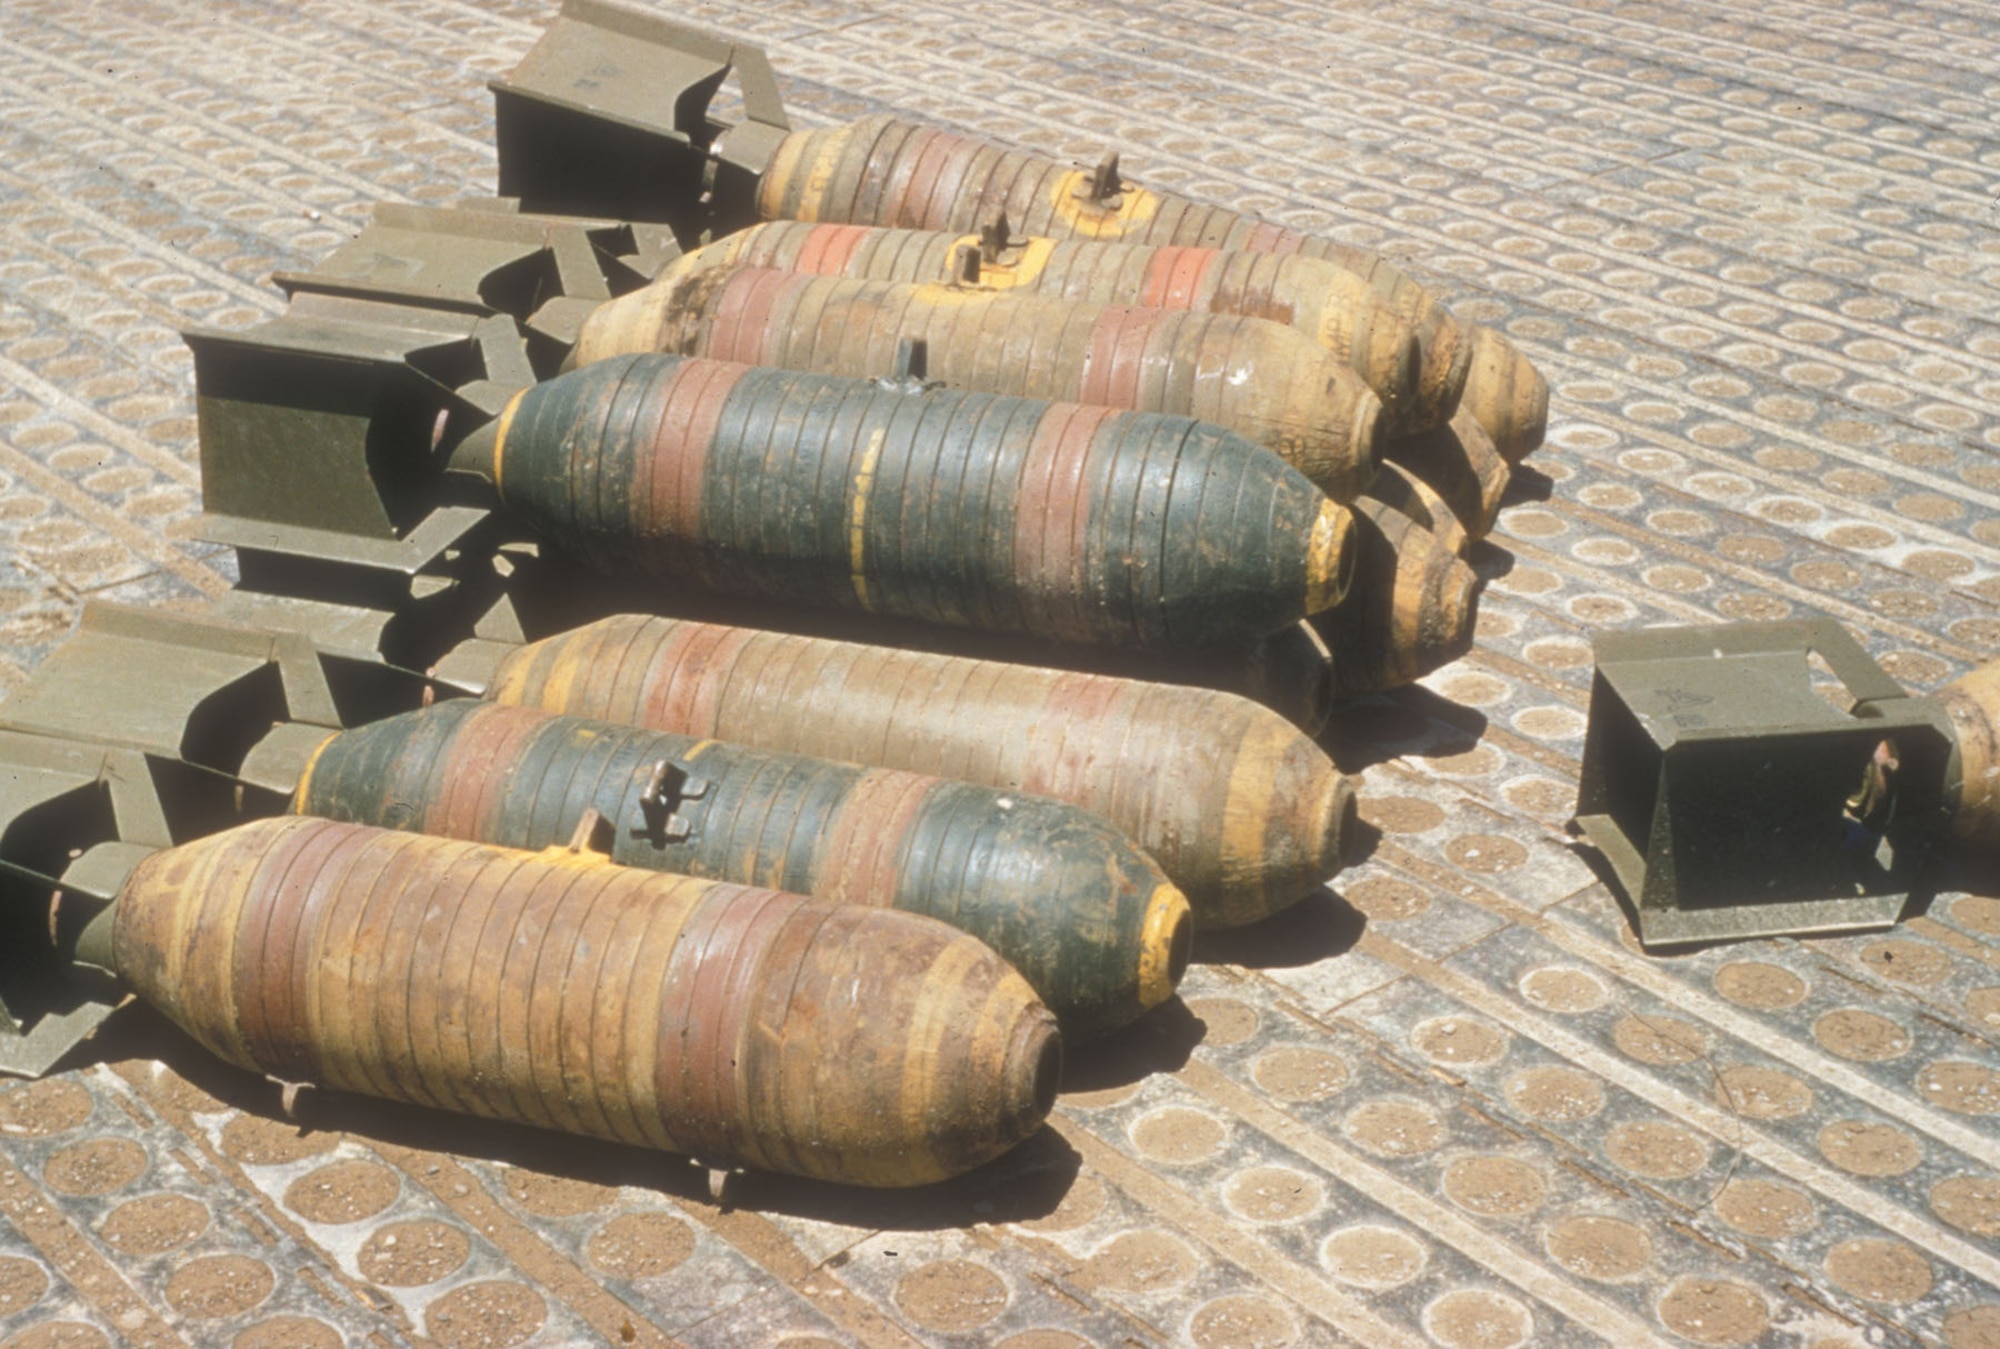 USAF interdiction aircraft carried a number of different weapons, including the fragmentation bombs pictured here. The bomb casings were partially cut so they detonated into more pieces. (U.S. Air Force photo)